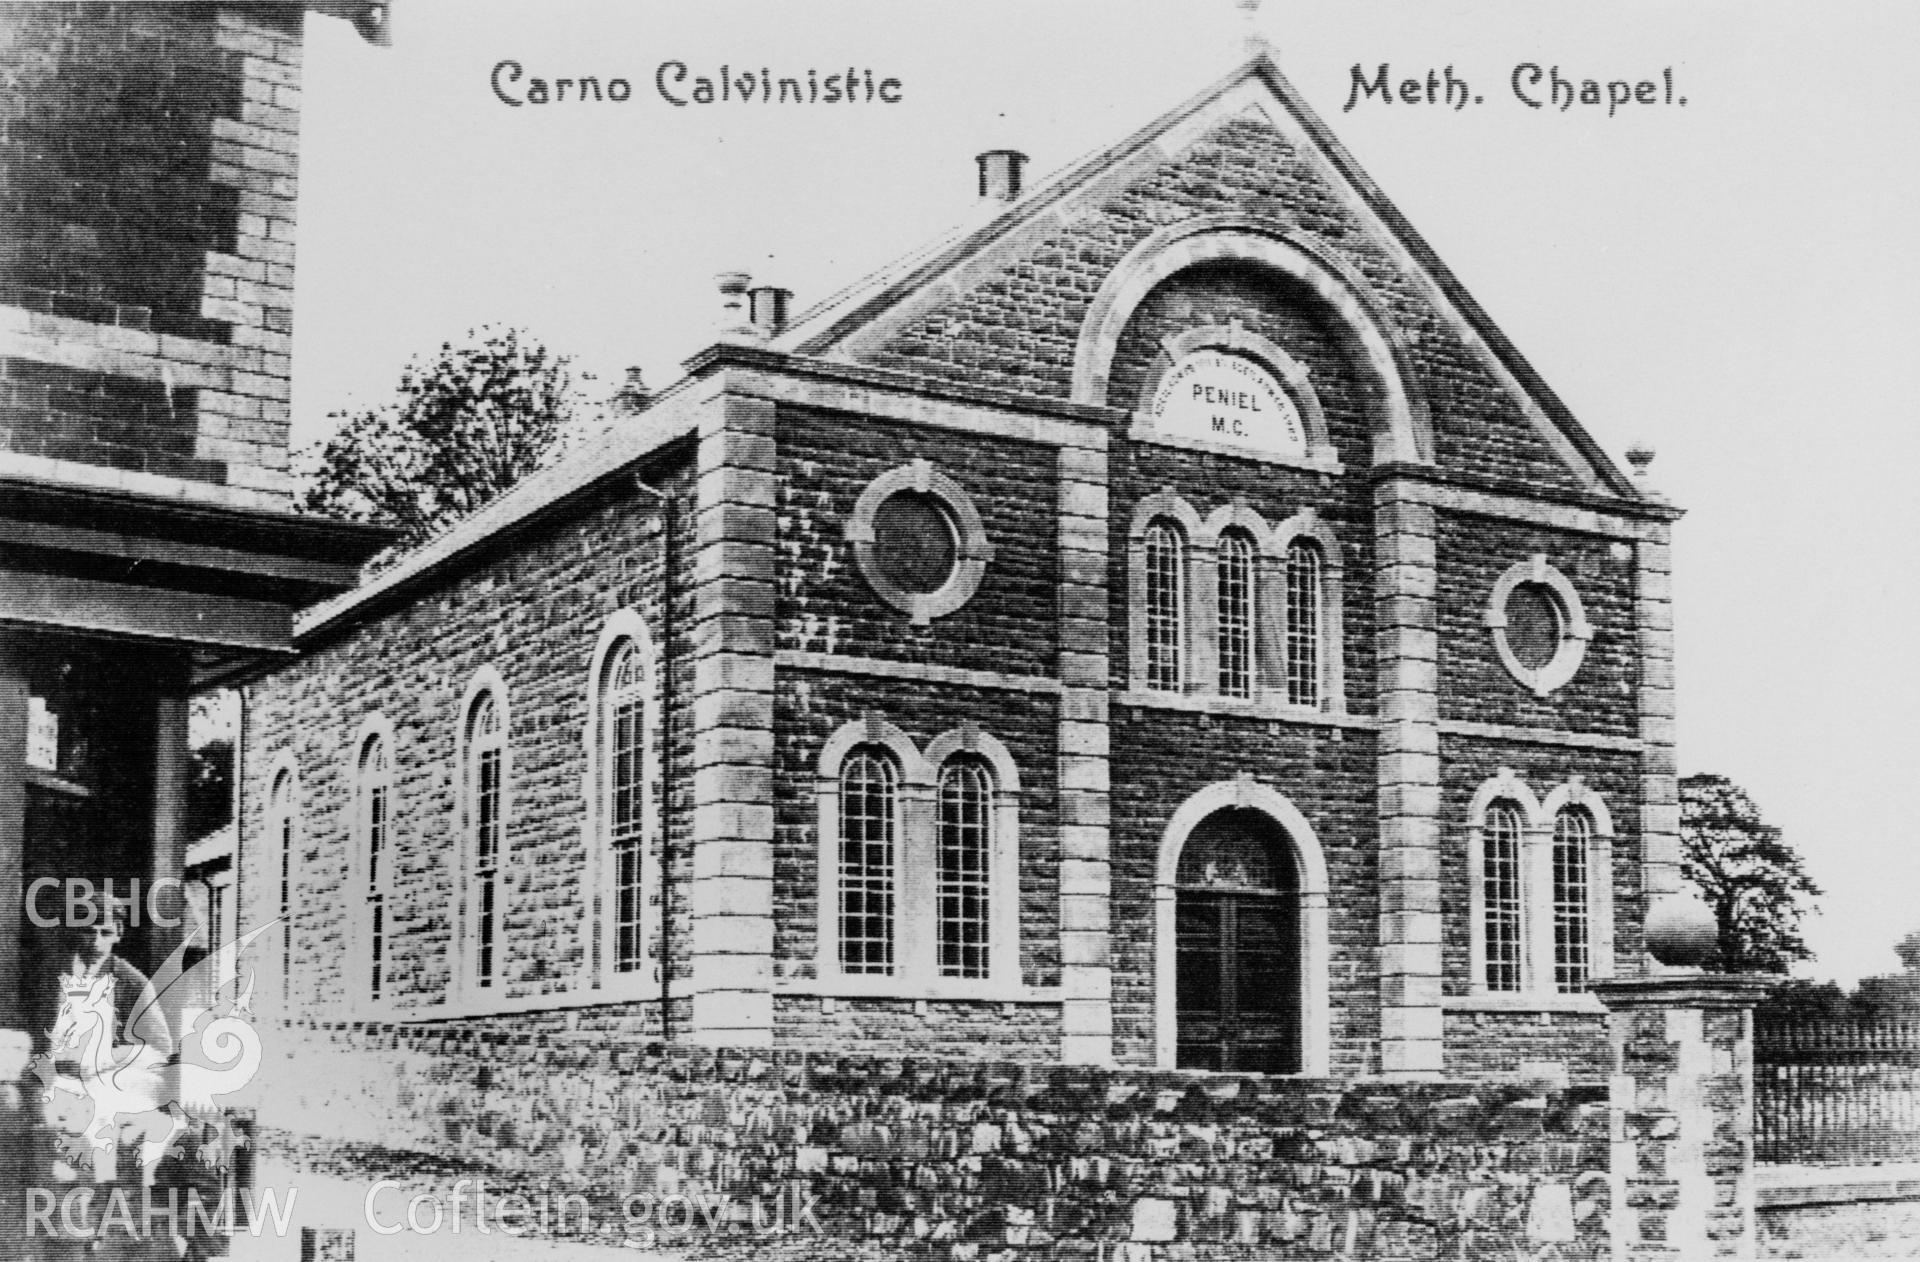 Peniel Chapel, Carno;  B&W print copied from an undated postcard loaned for copying by Dilys Glover, 21 Greenside, Mold. Copy negative held.